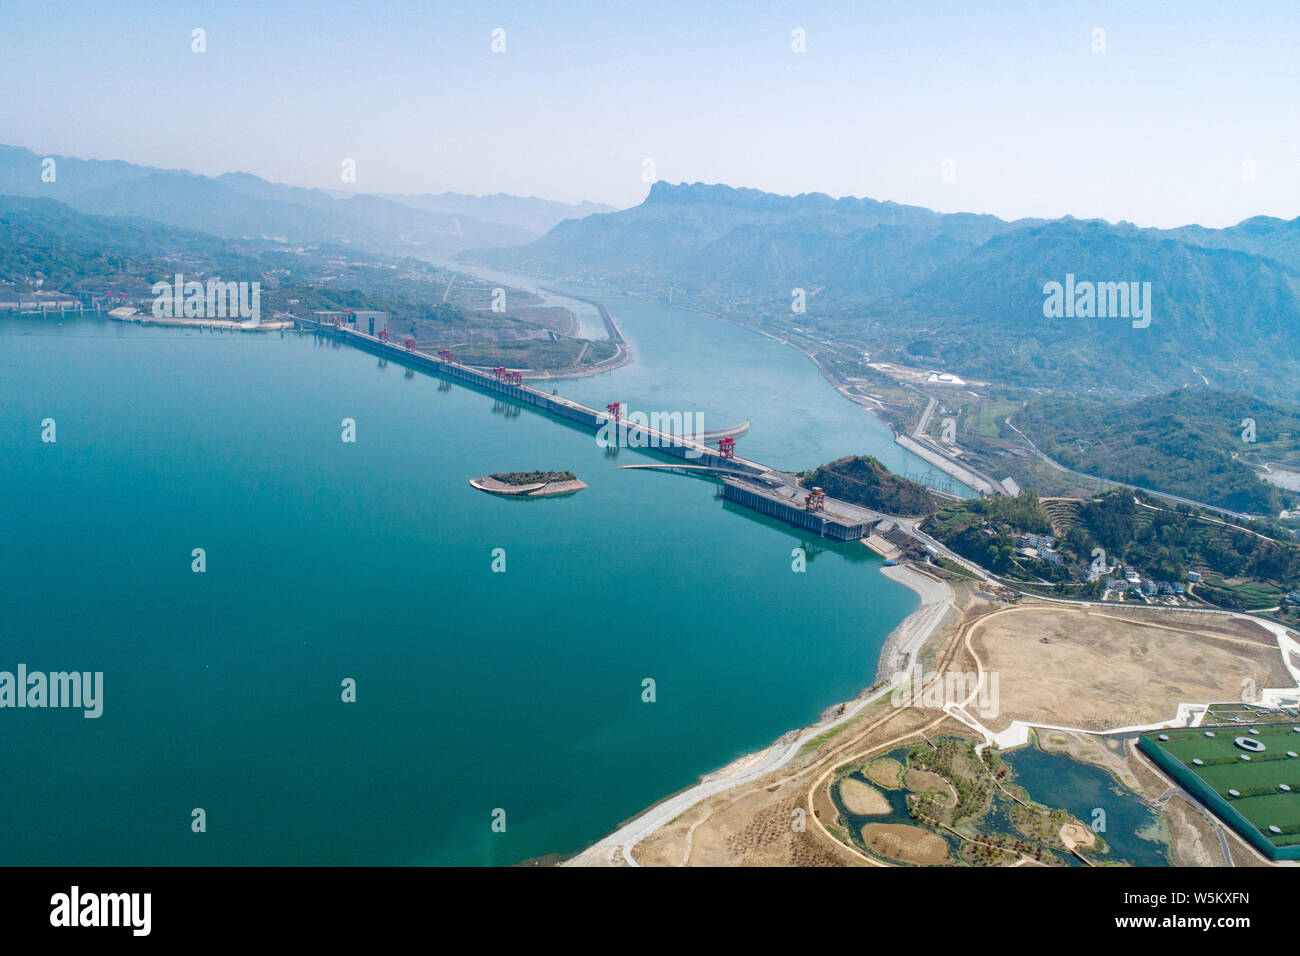 An aerial view of the Three Gorges Dam operated by China Three Gorges Corporation on the Yangtze River in Yichang city, central China's Hubei province Stock Photo